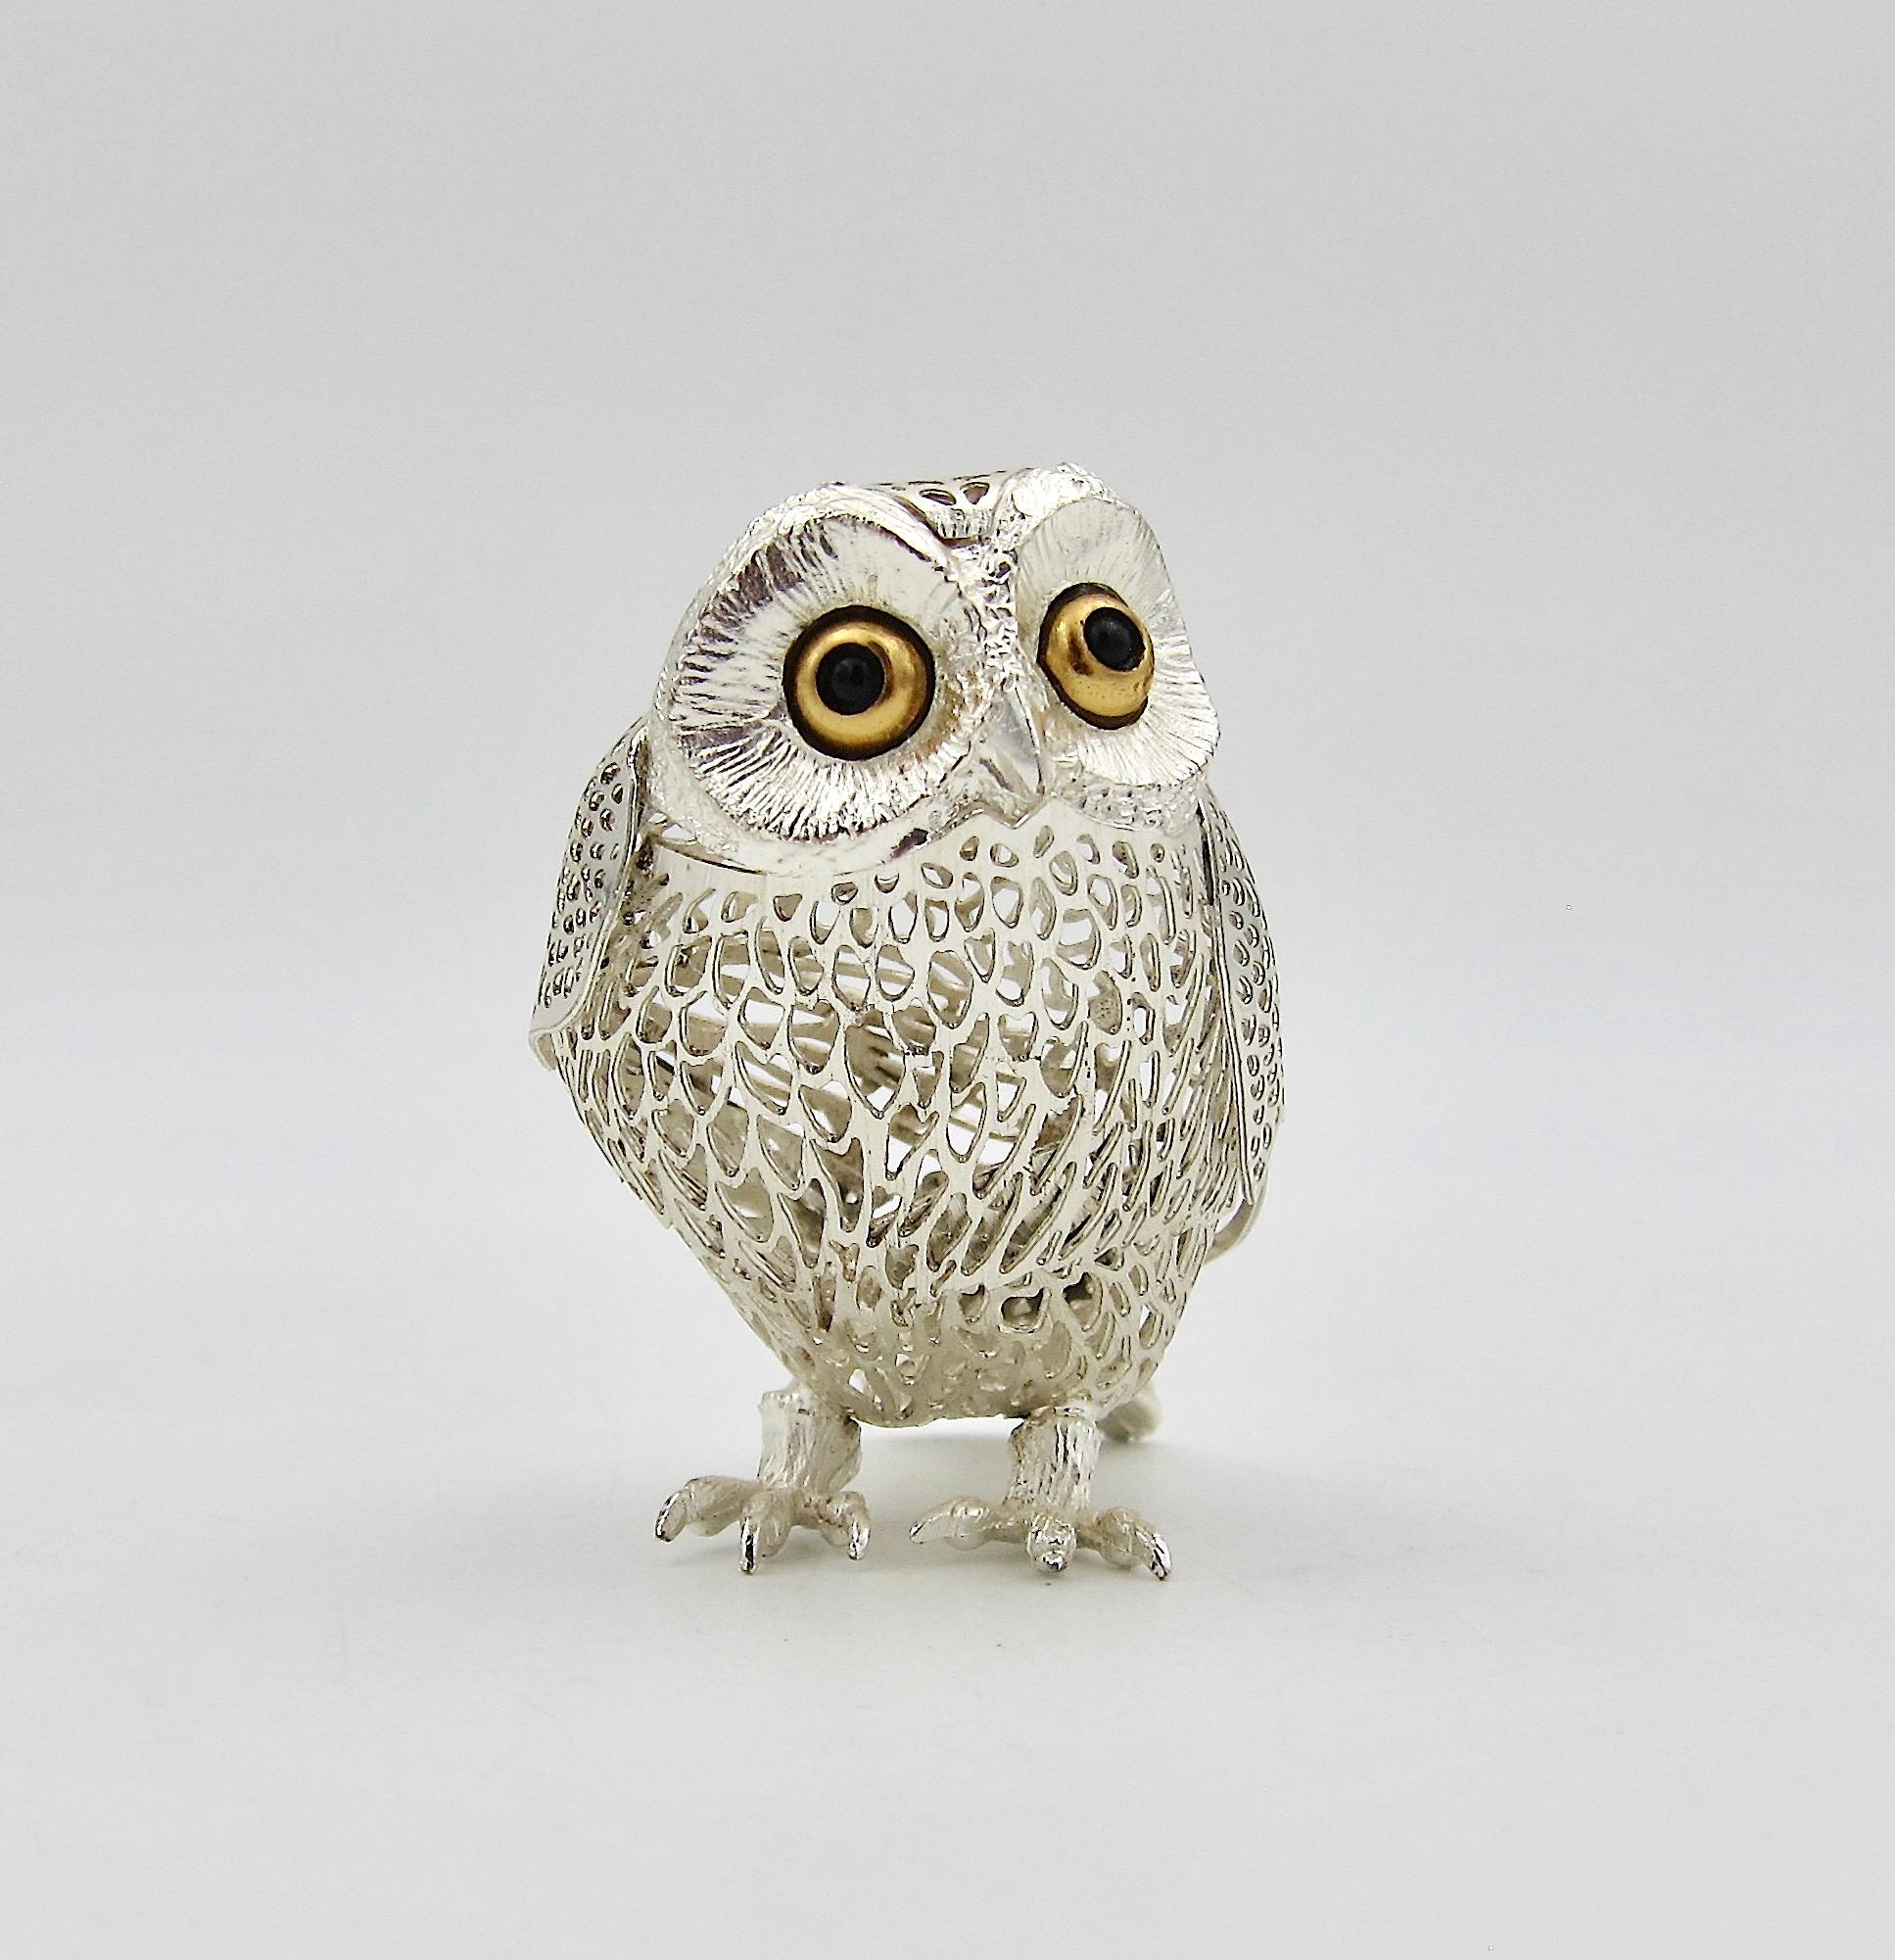 A silver-plated vintage owl figurine from the Christofle of Paris Collection Lumière d'Argent (Silver Light Collection). Le Grand Hibou (The Great Owl) has a delicate and lacey openwork silver metal body with textured feathers, gold tone eyes and